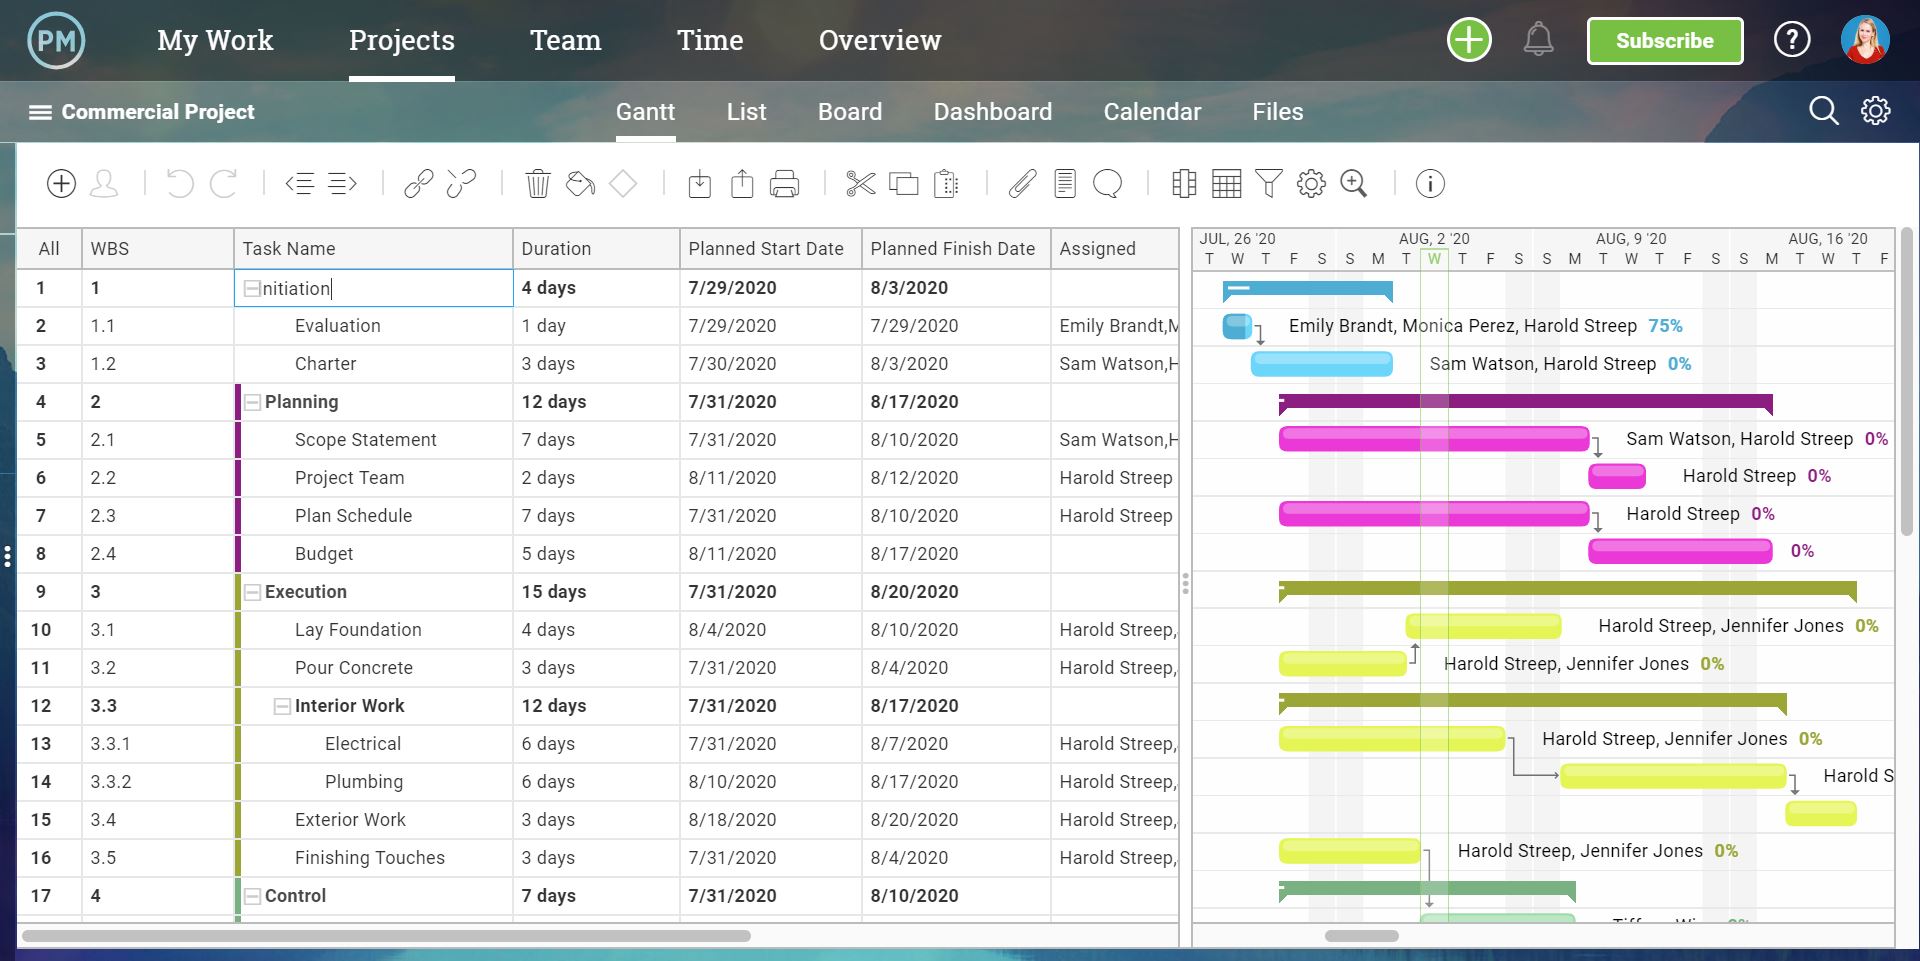 A screenshot of ProjectManager.com’s Gantt chart interface, showing tasks and subtasks for a work breakdown structure WBS.